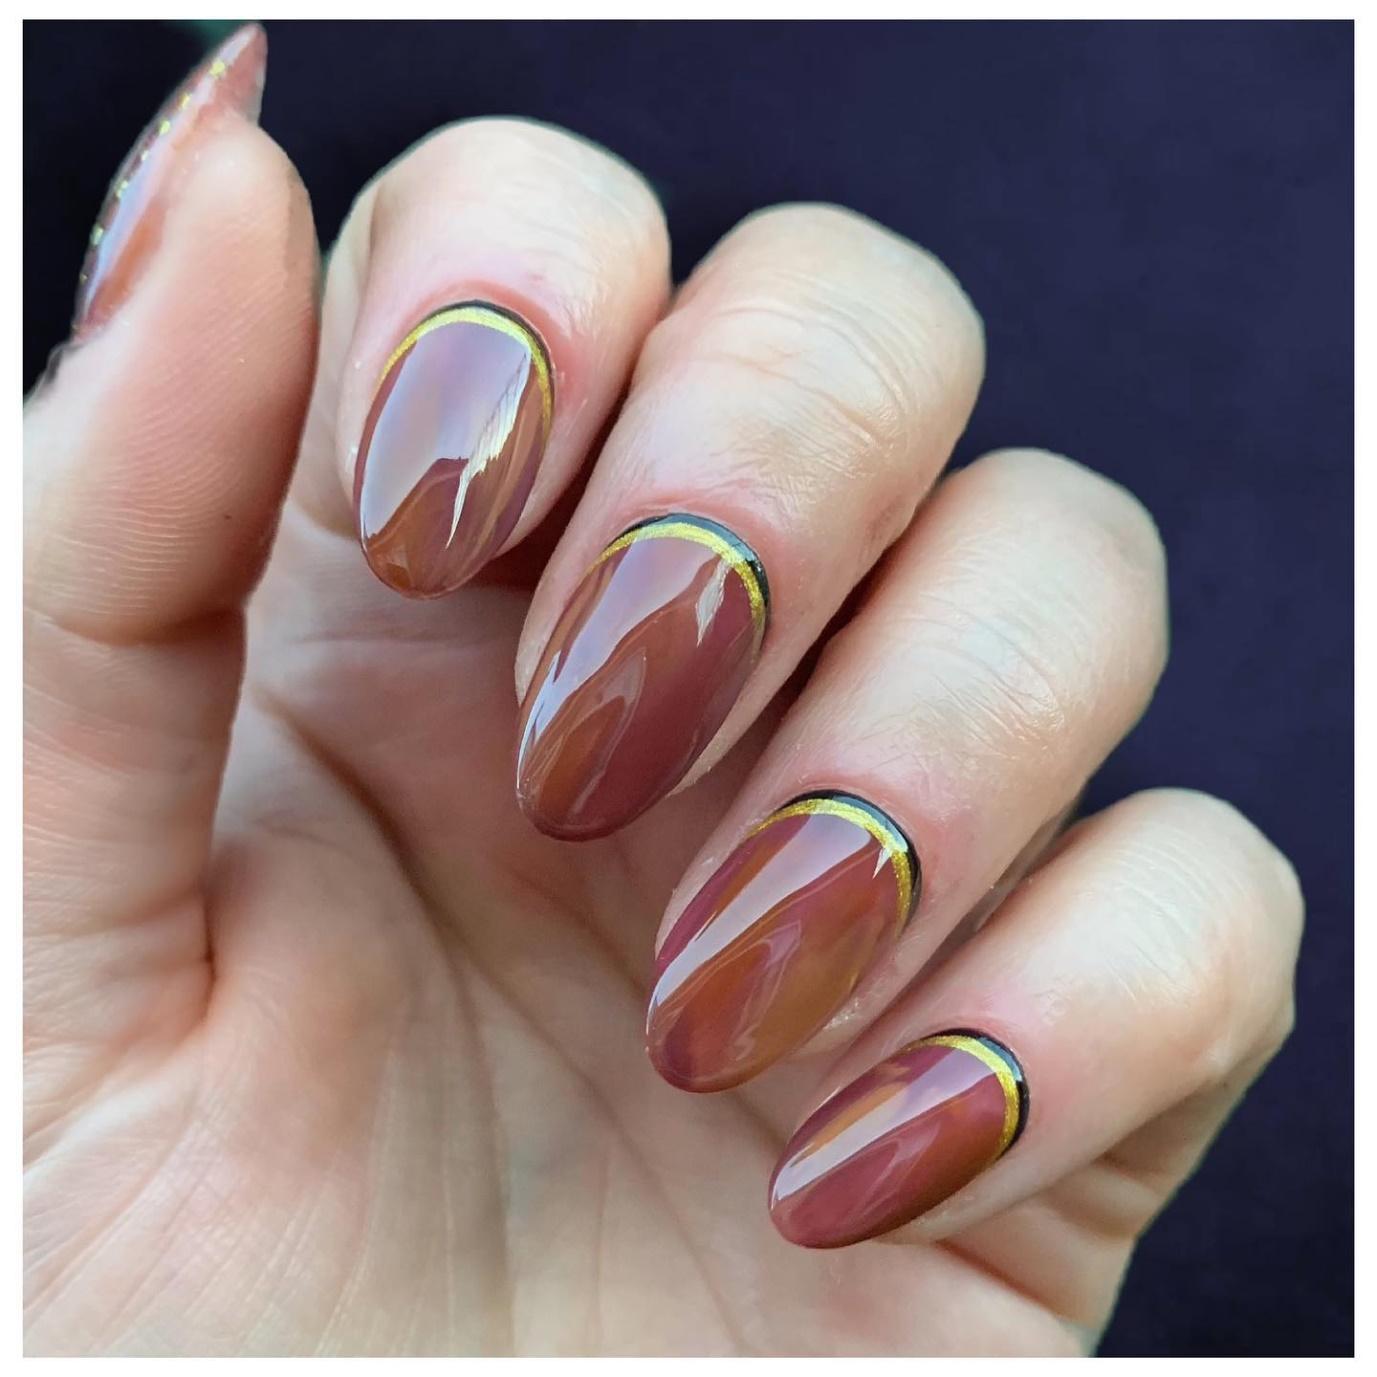 Subtle Marble Nails and Cuticle Cuffs